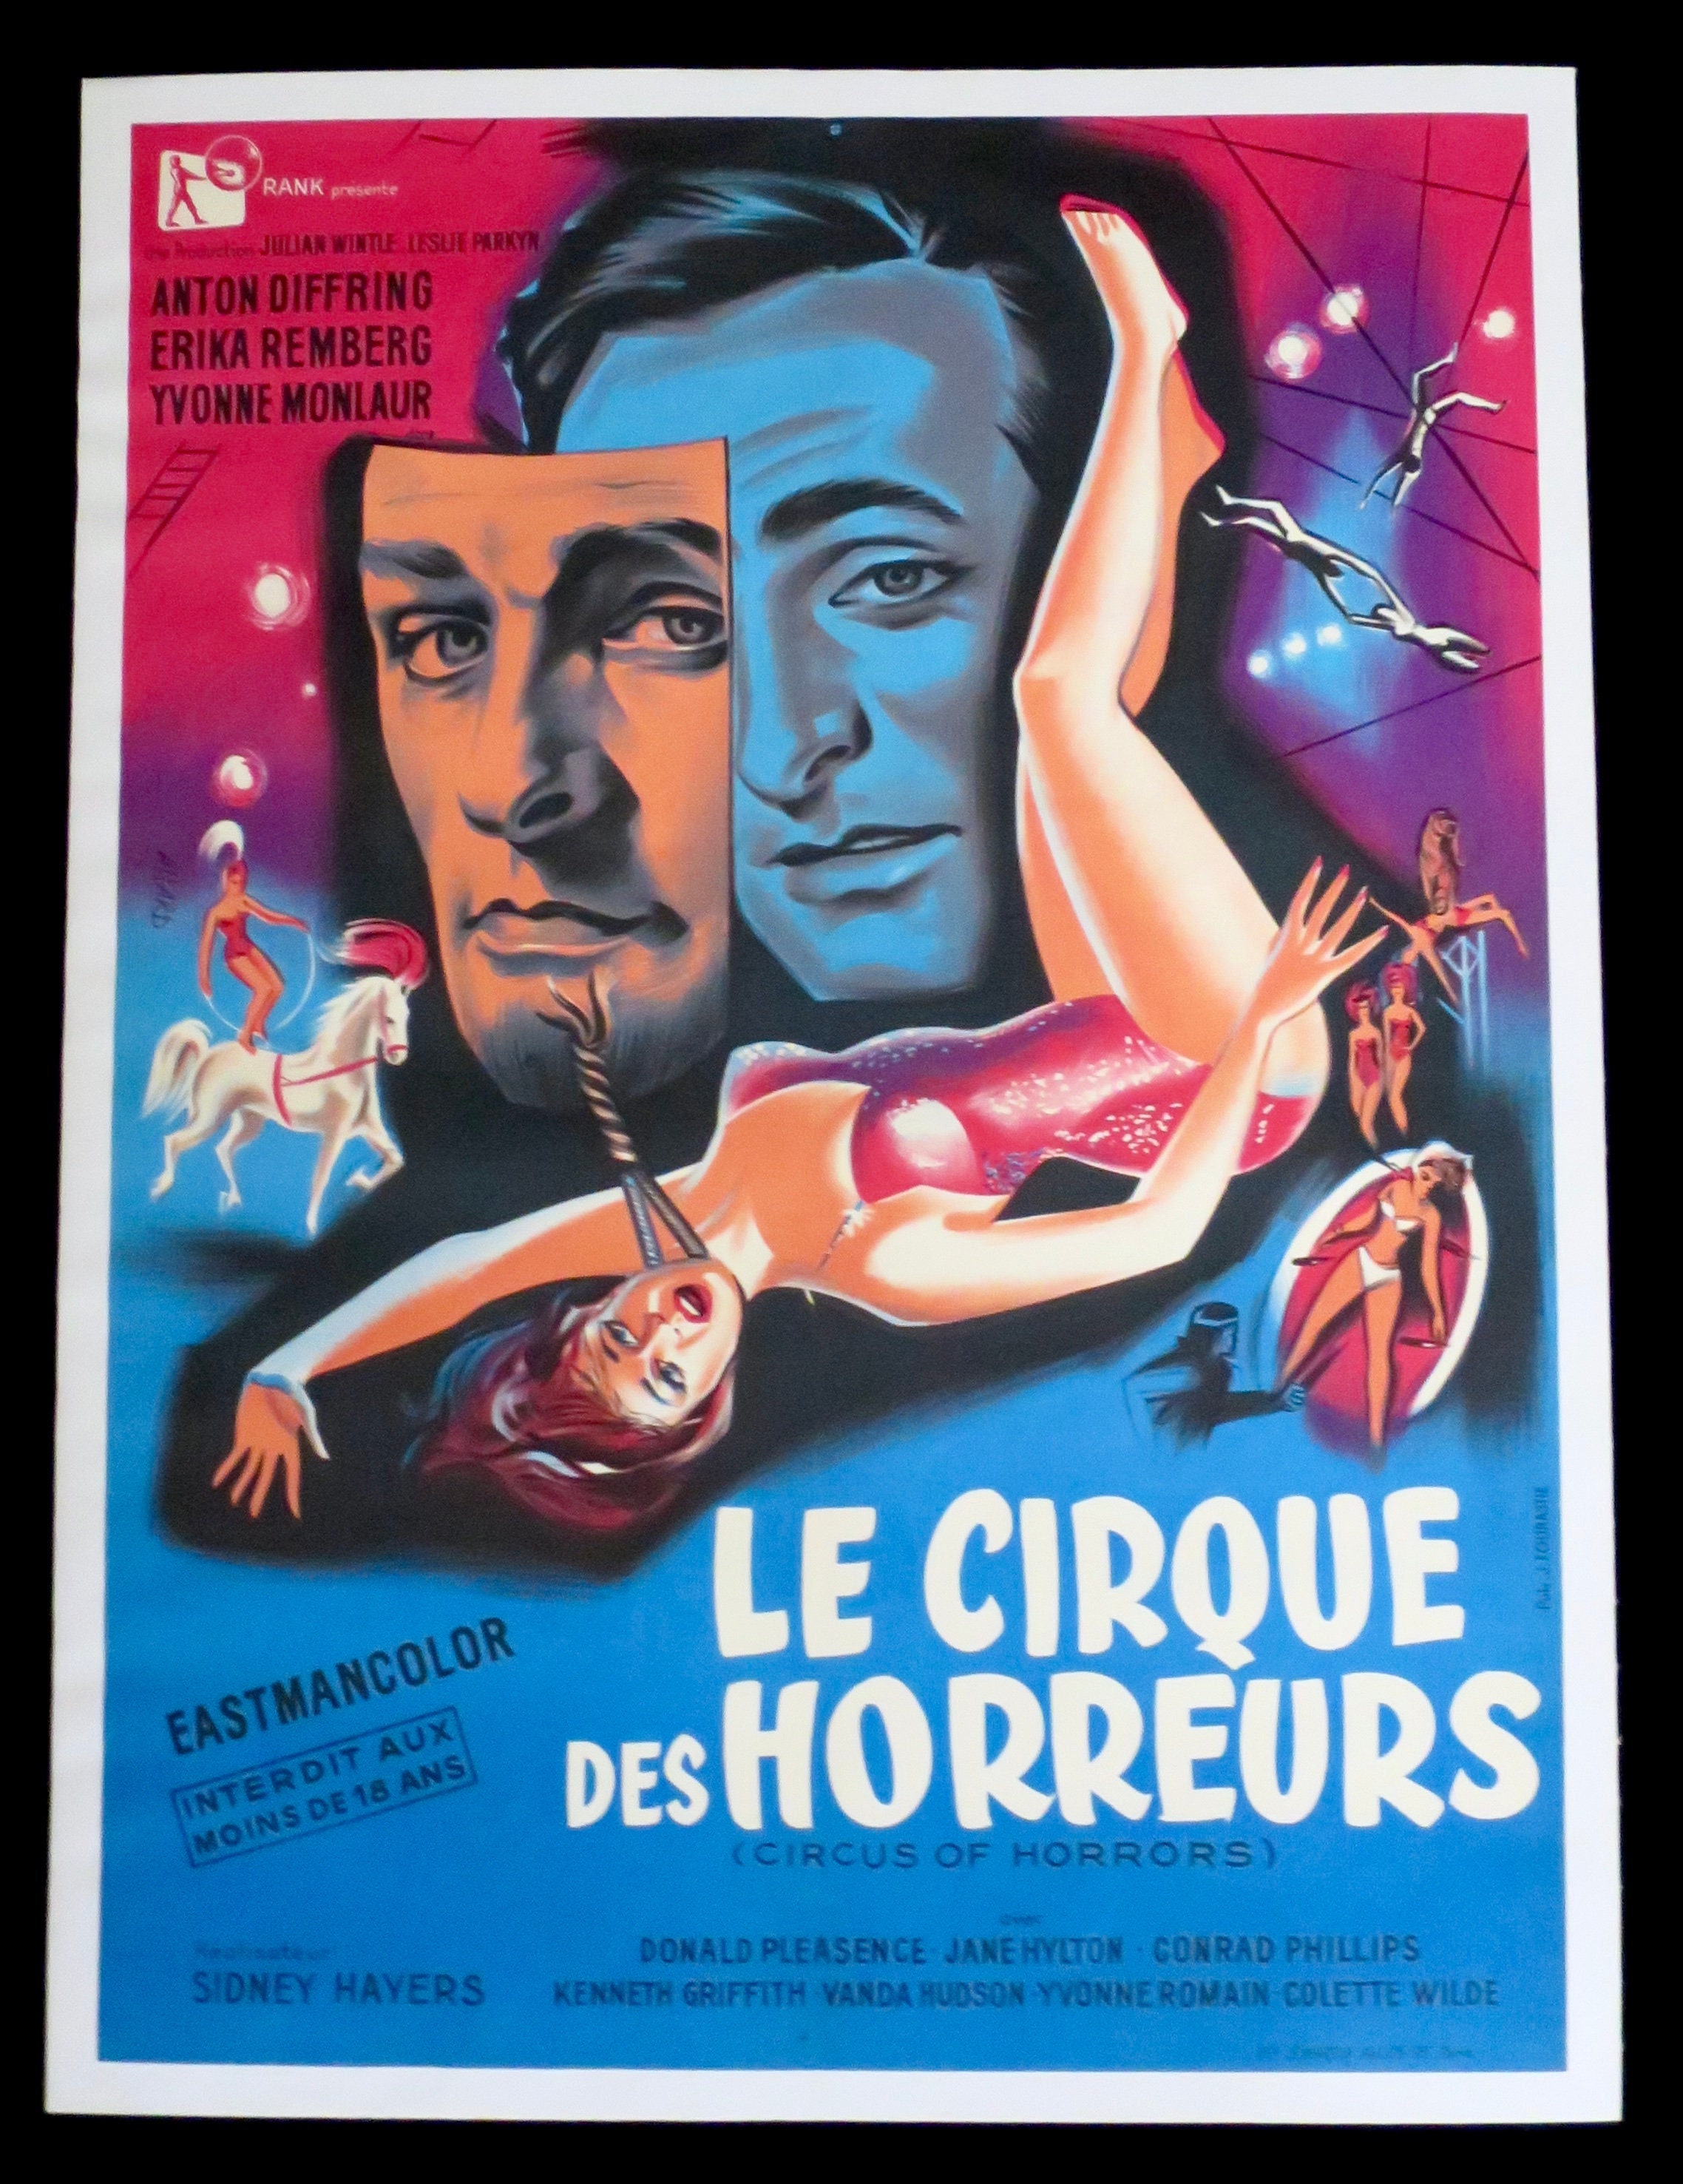 CIRCUS OF HORRORS ~ Original 1960 French Affiche ~ Very Fine Cond on Linen ~ Vivid Georges Allard Horror Art! Anton Diffring Stars!